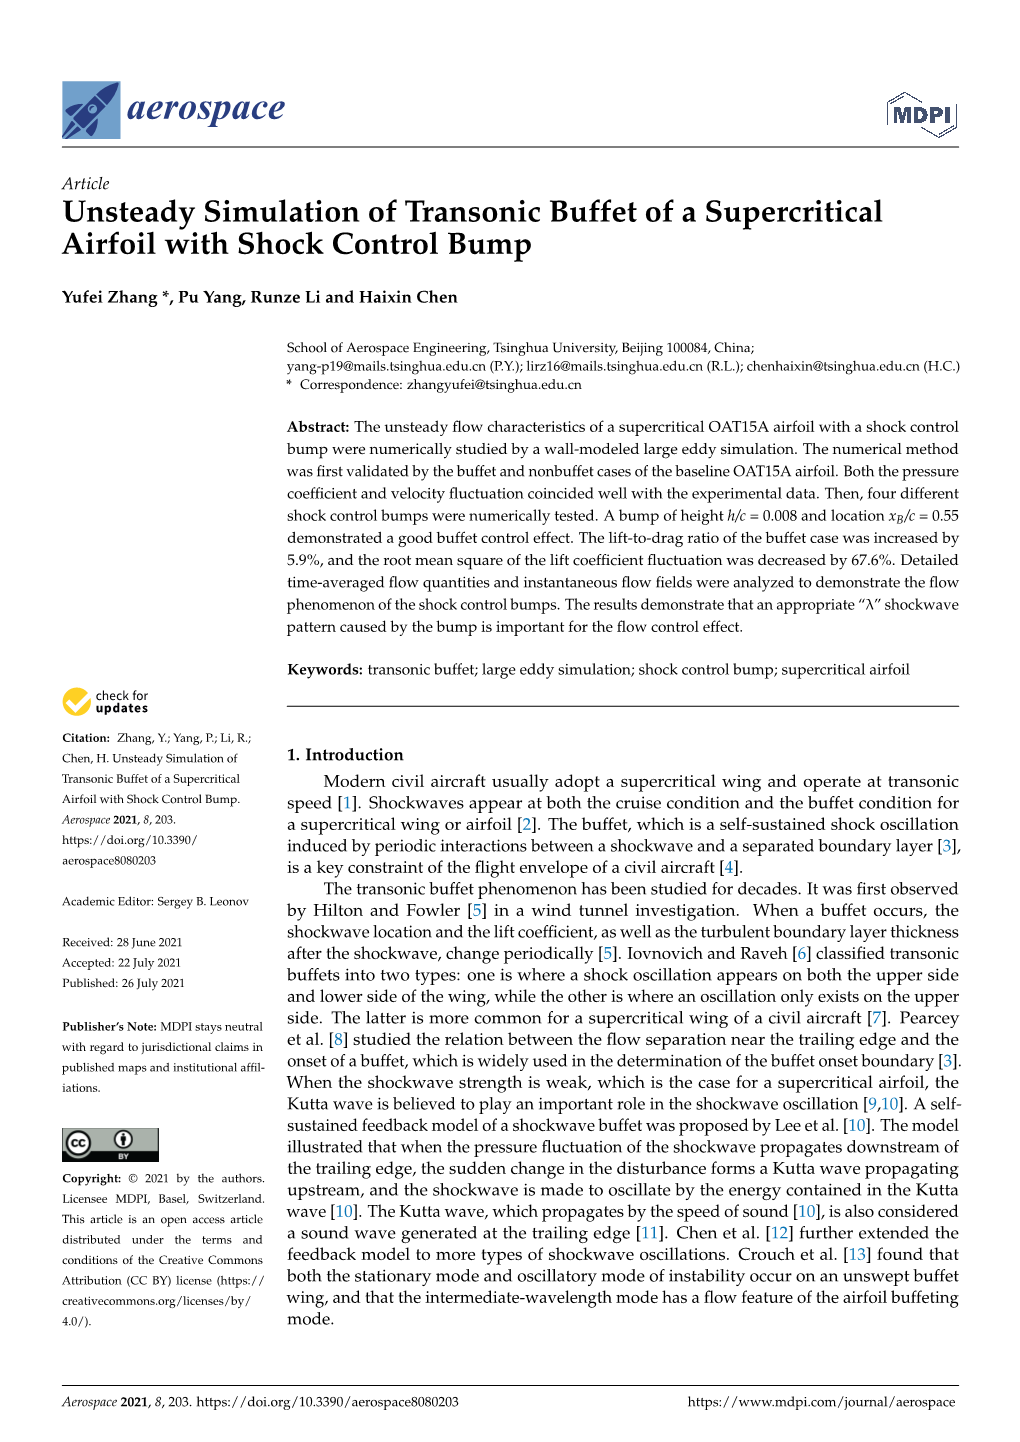 Unsteady Simulation of Transonic Buffet of a Supercritical Airfoil with Shock Control Bump